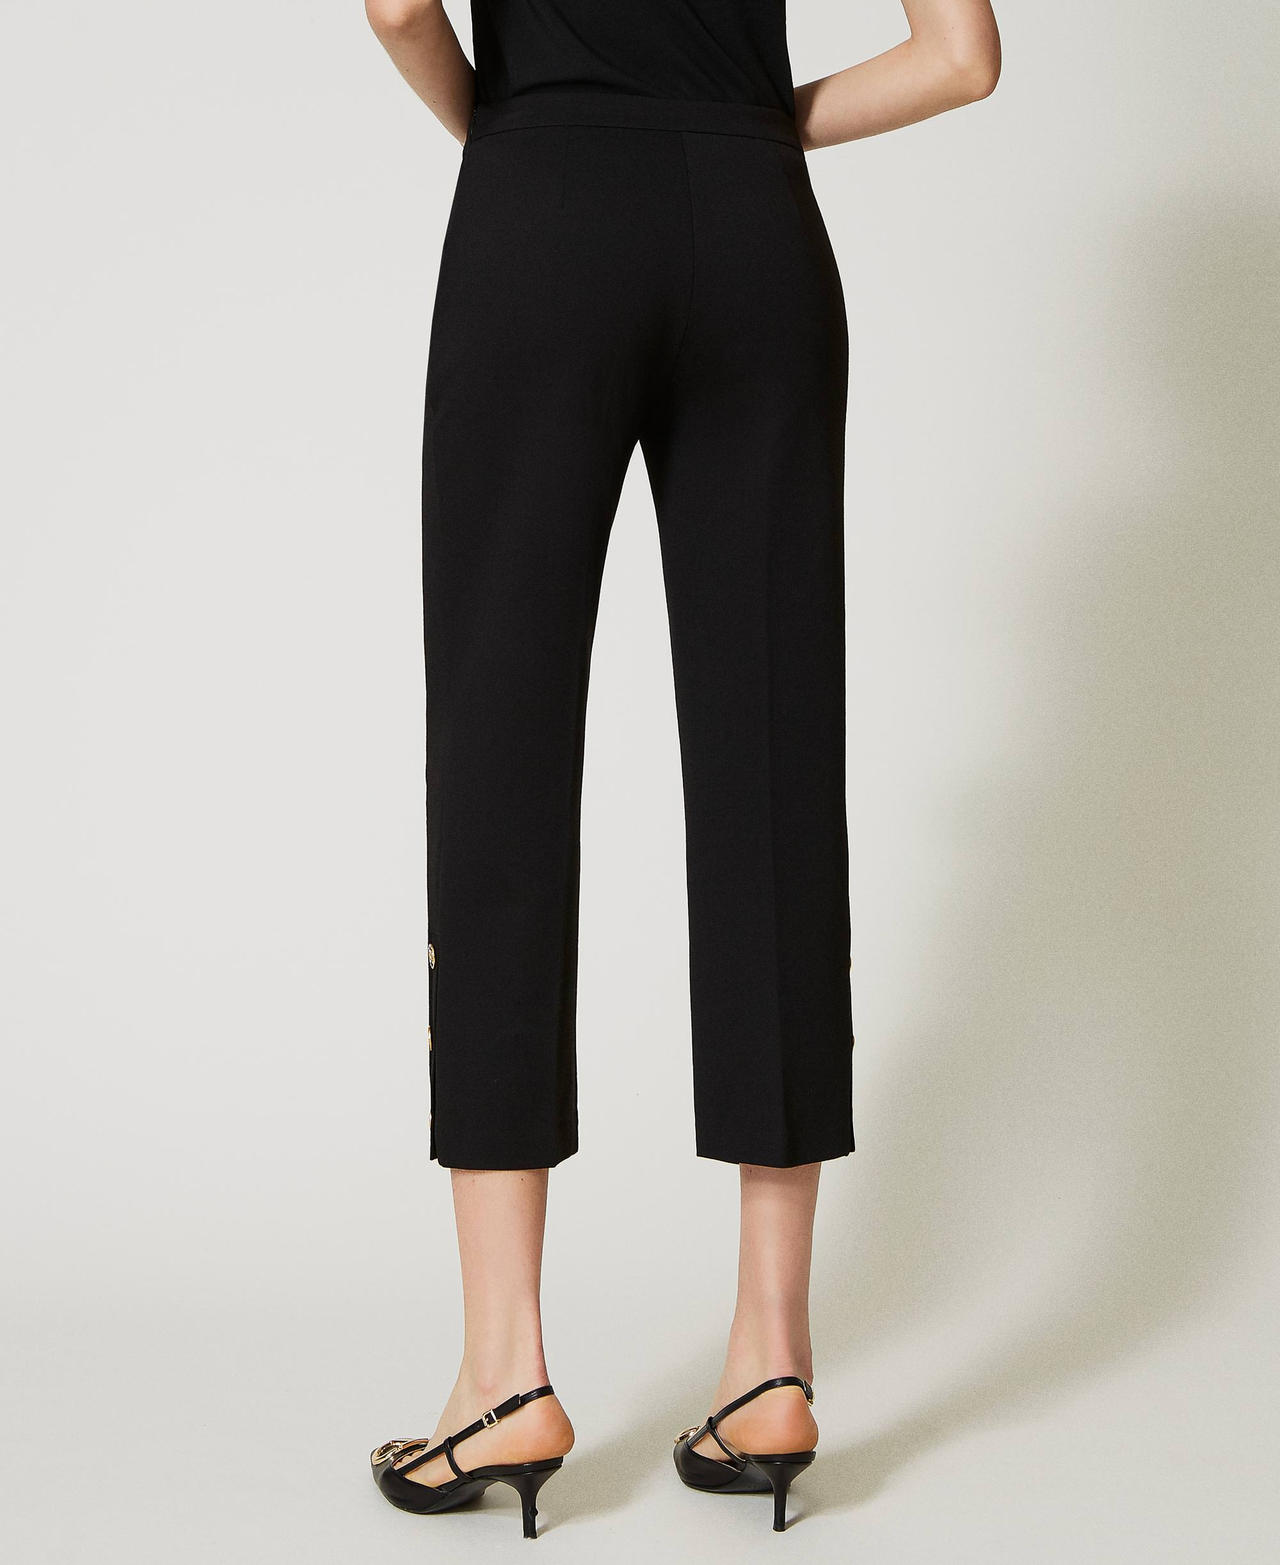 Pantalones cropped con botones Oval T Negro Mujer 231TP2183-03